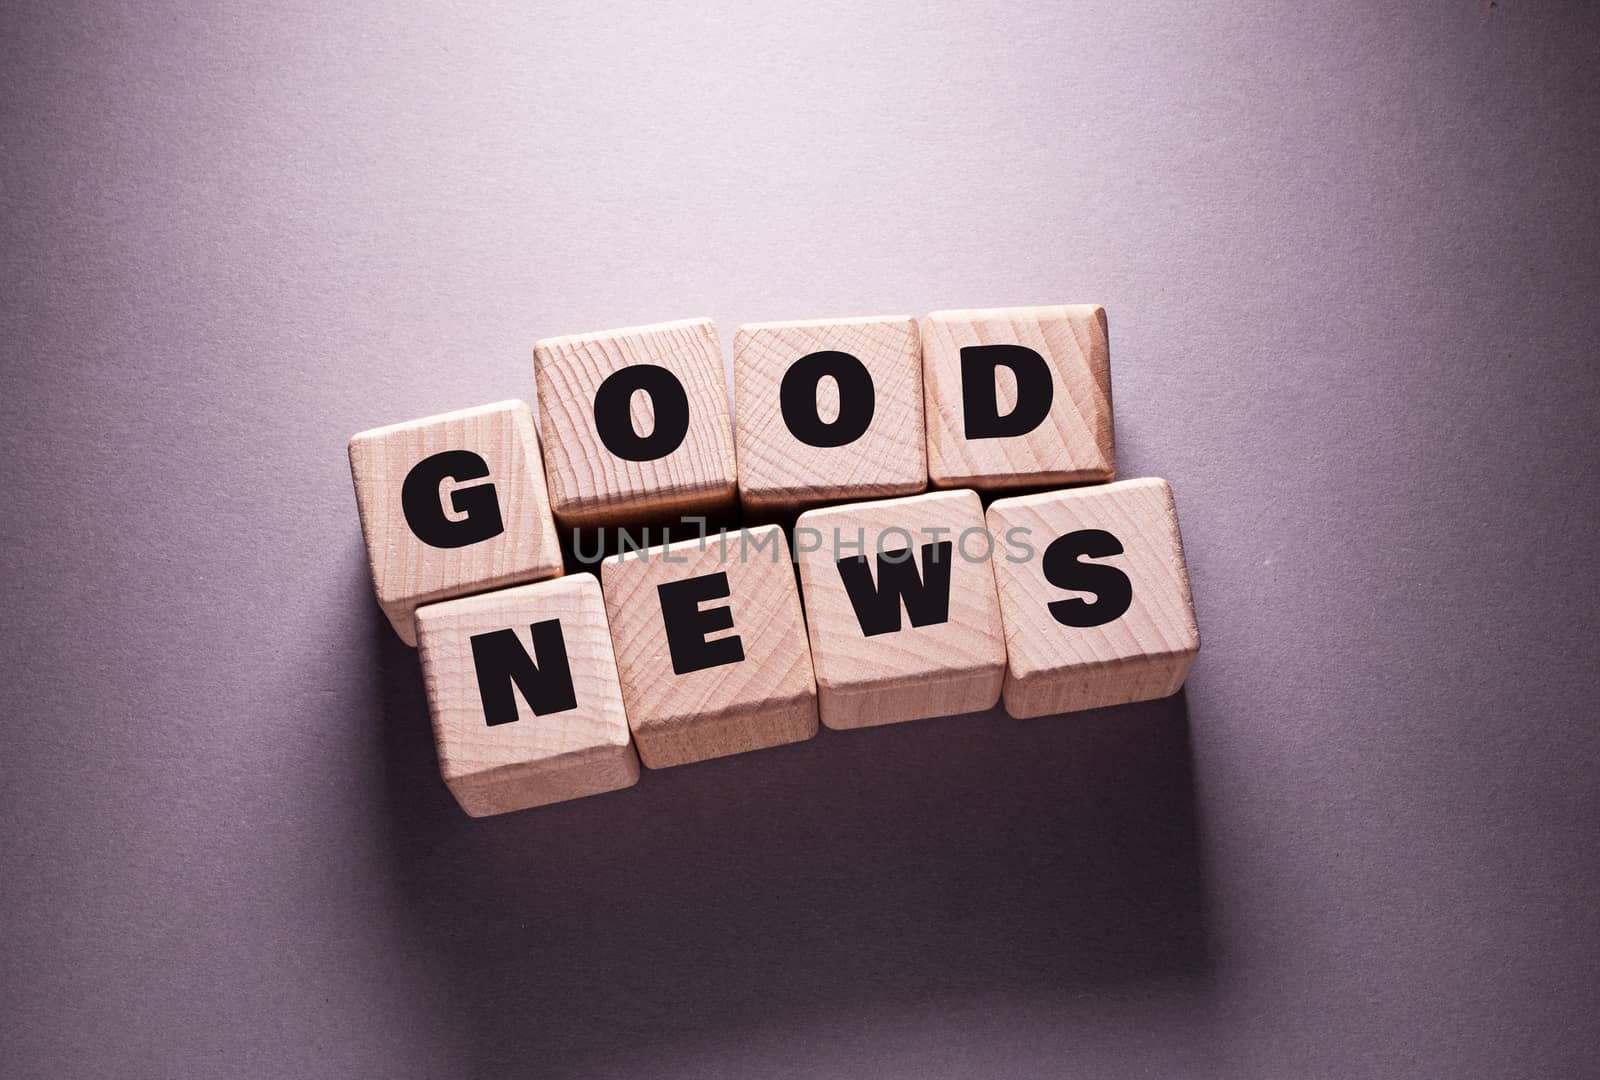 Good News Word with Wooden Cubes by Jievani